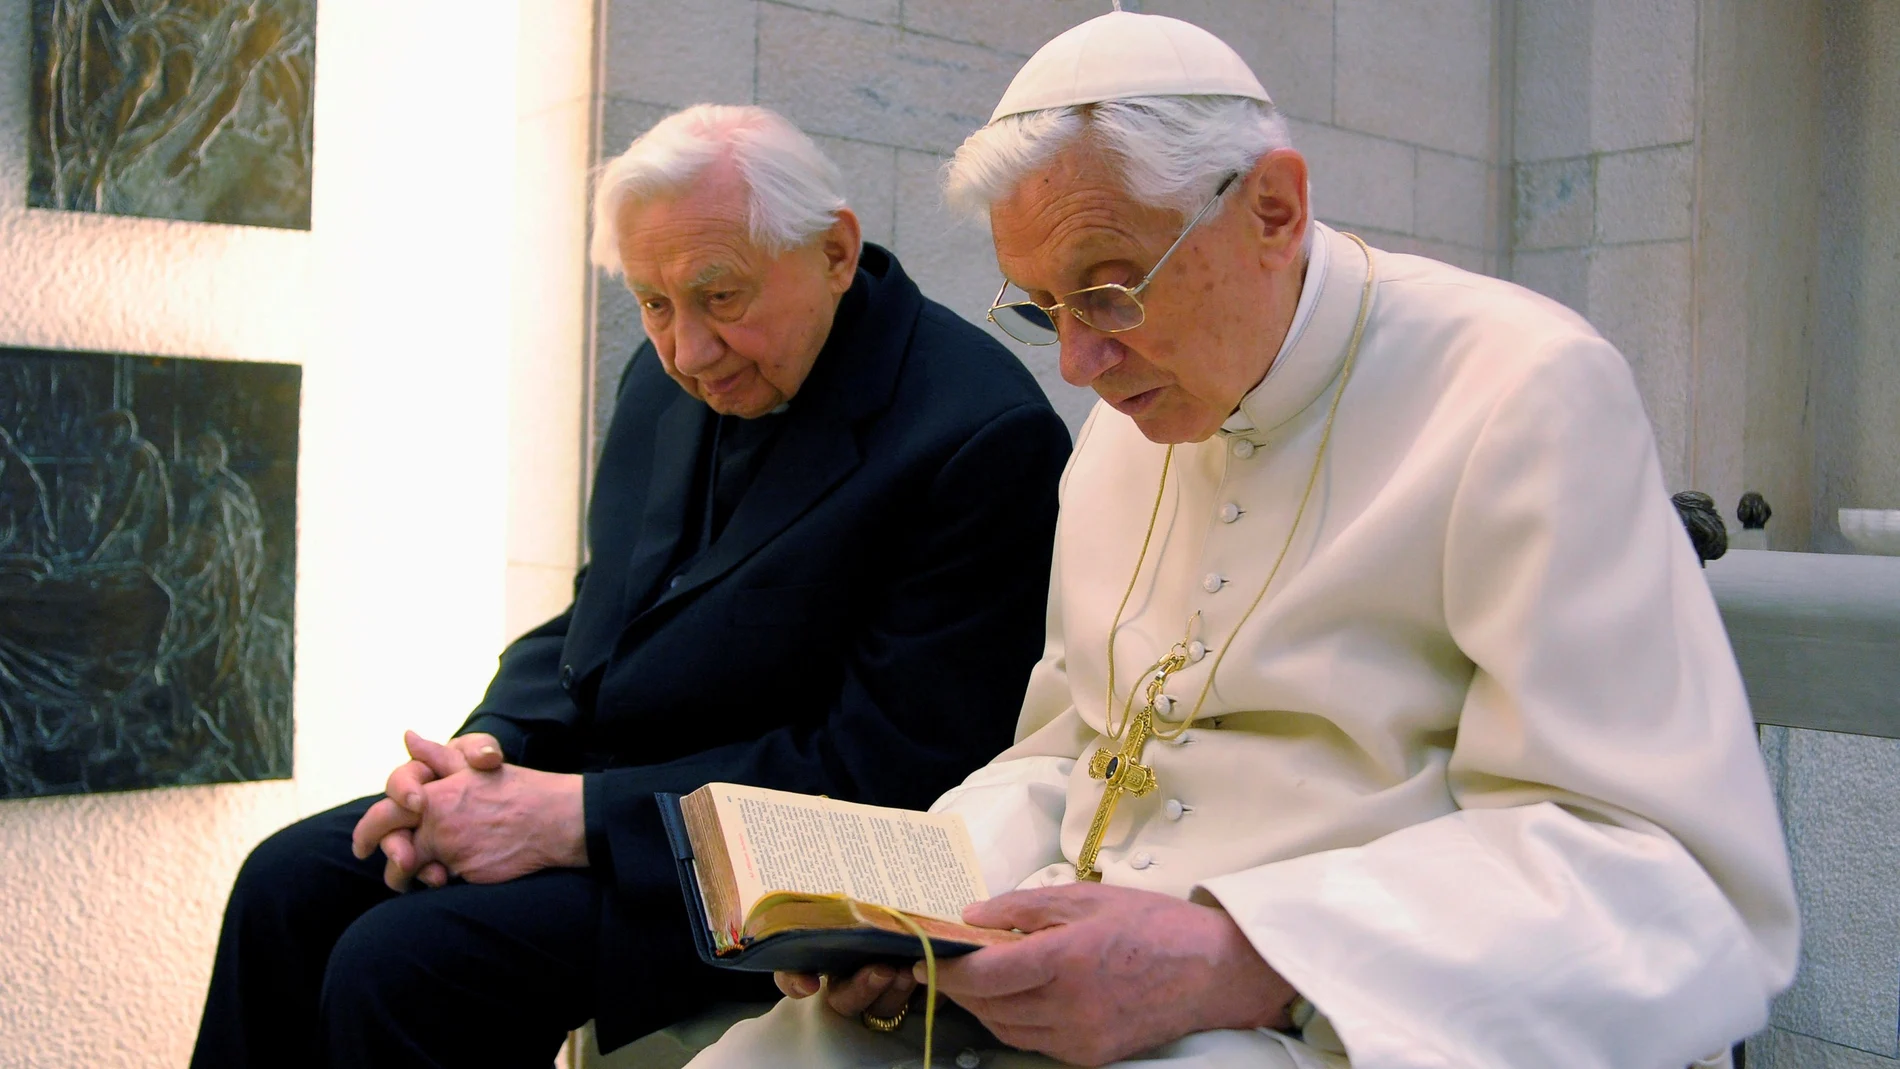 FILE PHOTO: Pope Benedict XVI prays with his brother Mons. Georg Ratzinger in his private chapel at the Vatican